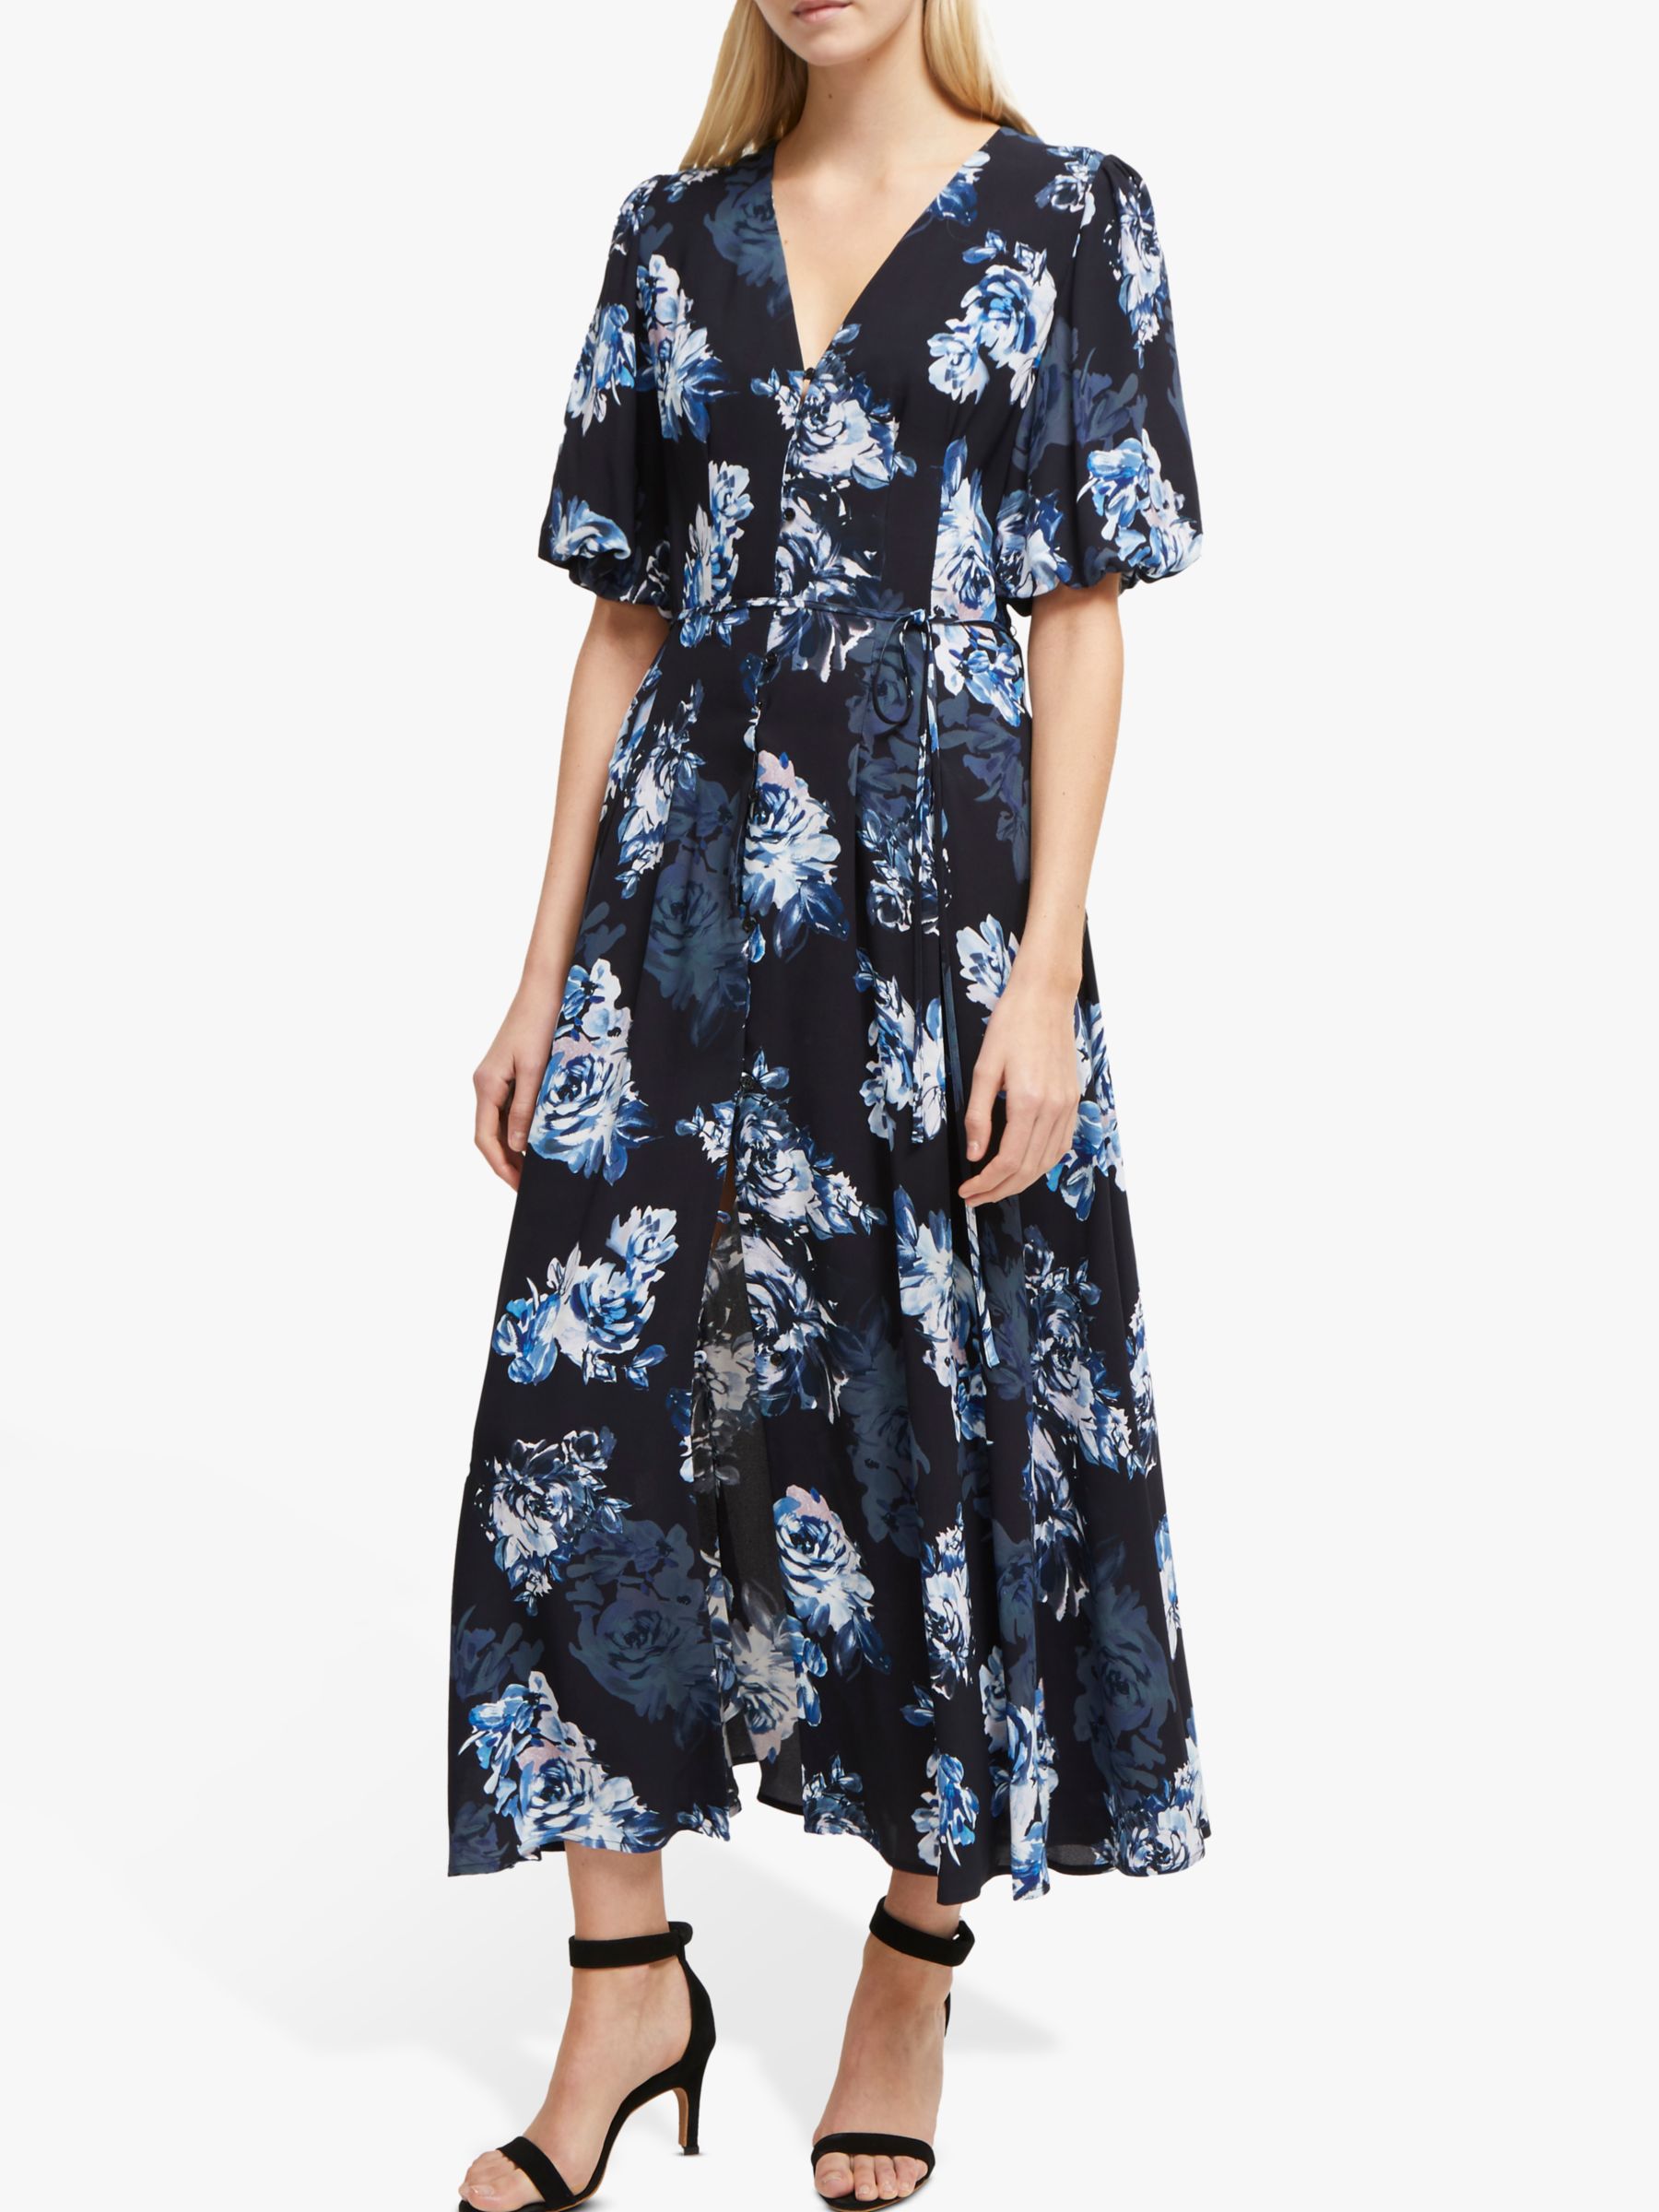 French Connection Caterina Button Down Dress, Utility Blue/Multi